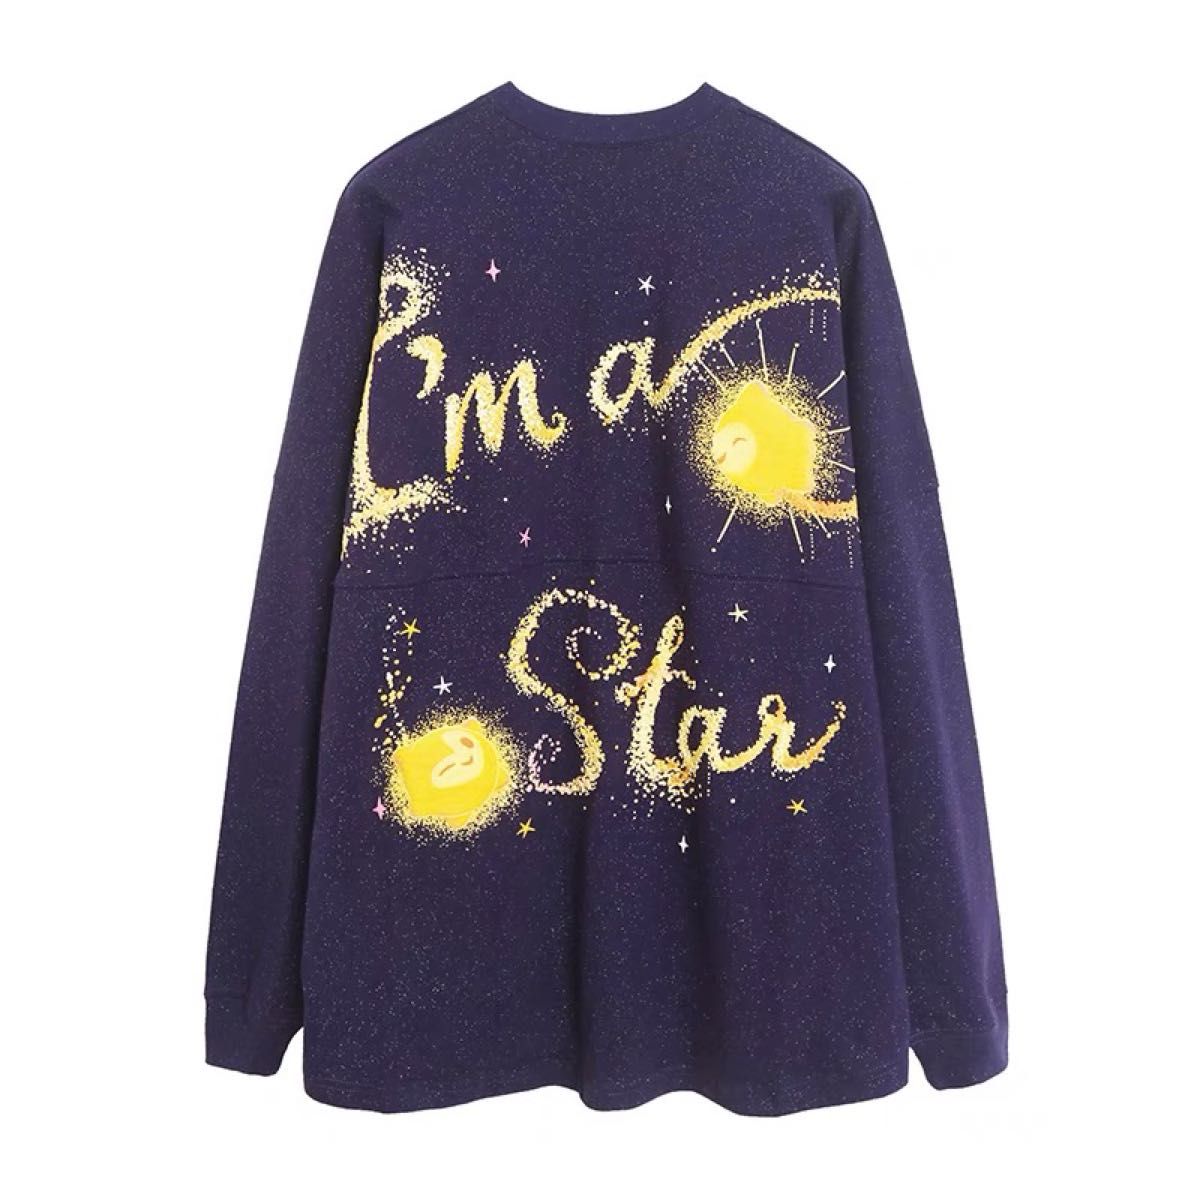 Star Spirit Jersey for Adults – Wish